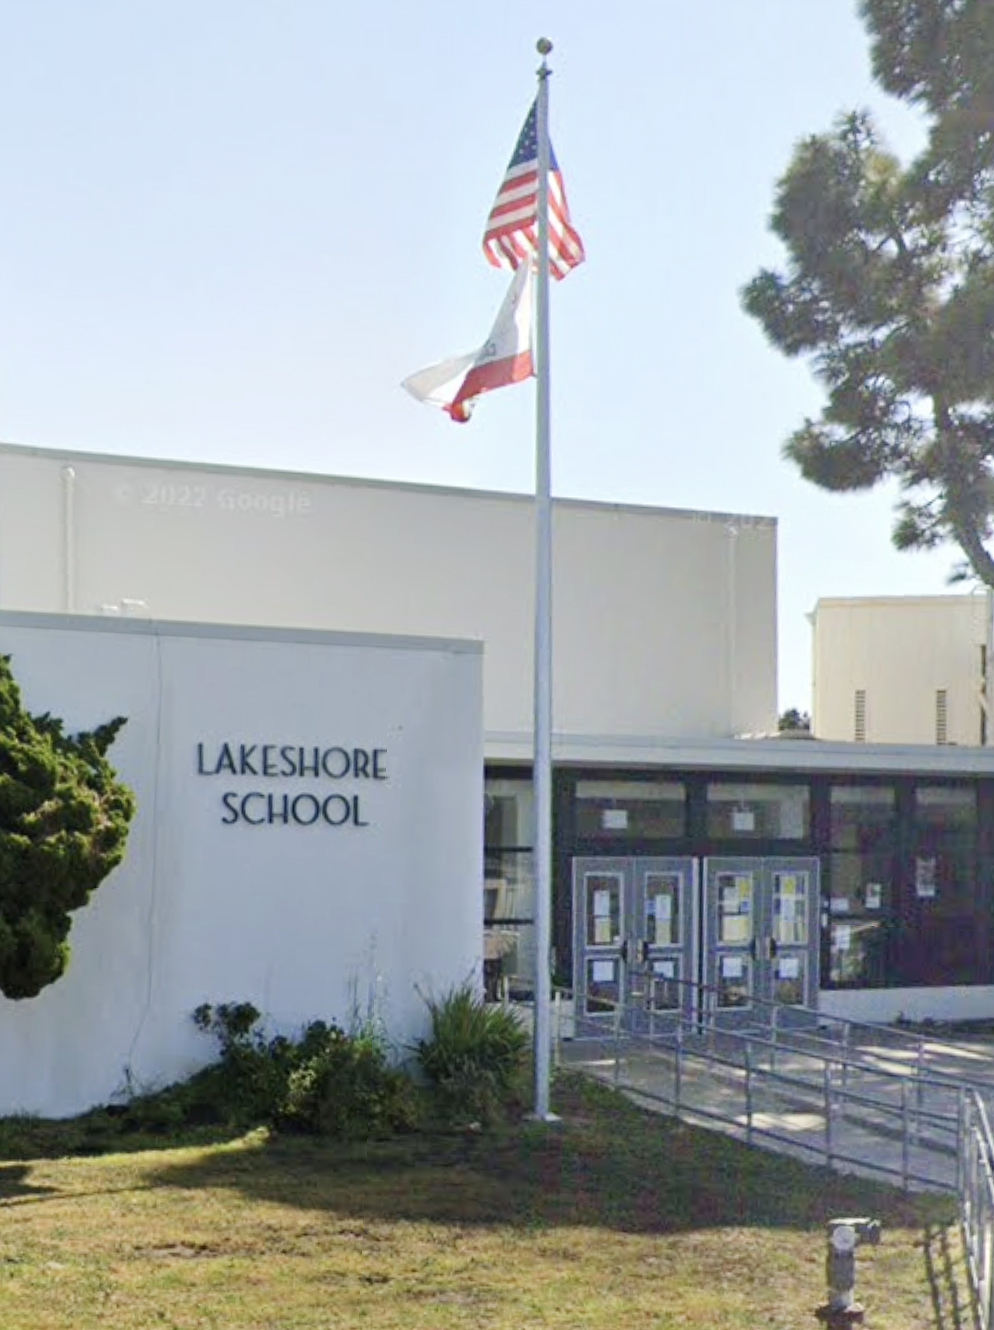 A flagpole with US &amp; California flags flies before &quot;Lakeshore School&quot; with glass doors and a ramp.